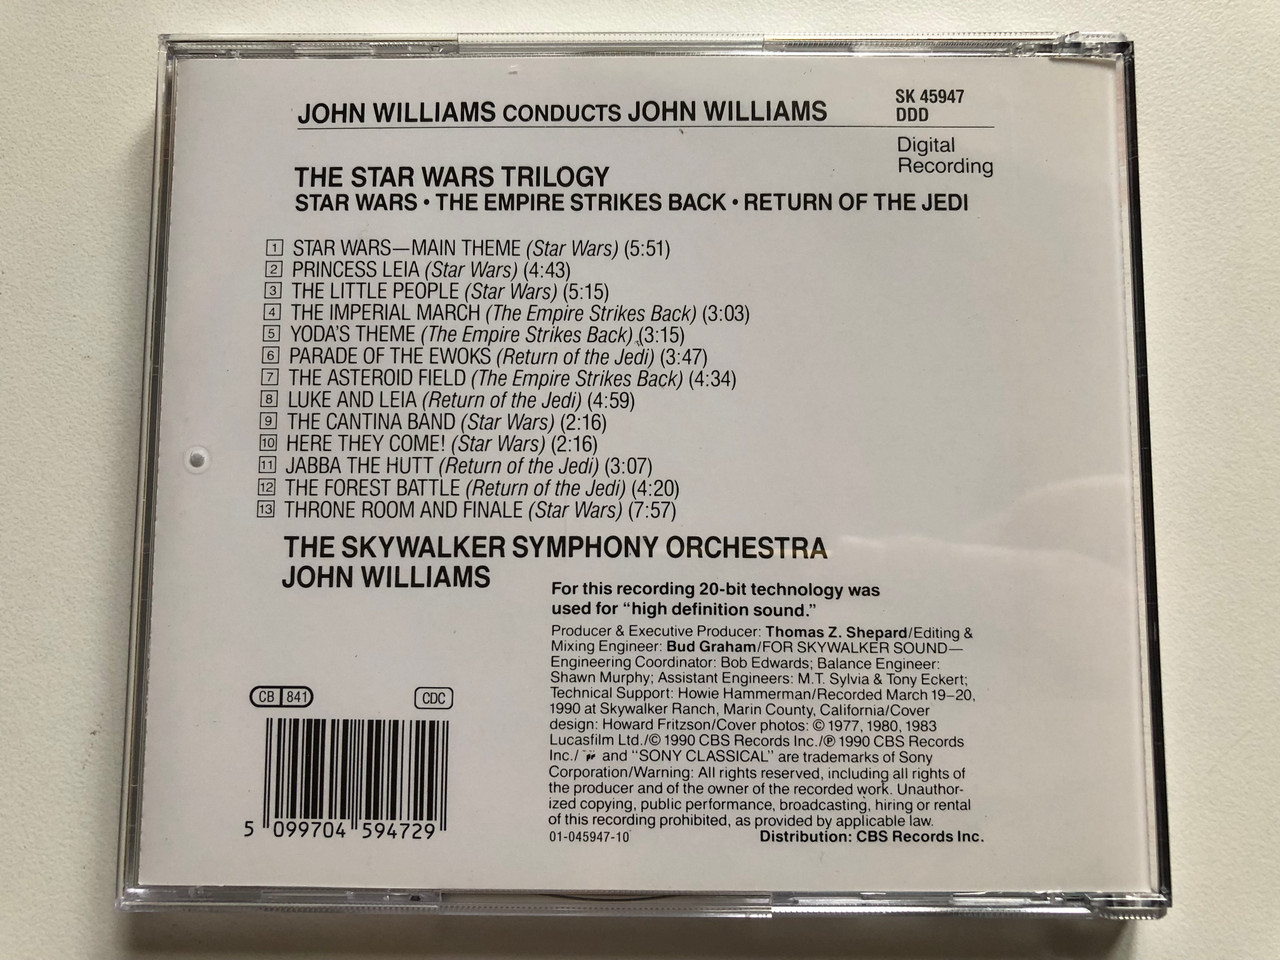 https://cdn10.bigcommerce.com/s-62bdpkt7pb/products/0/images/313156/John_Williams_Conducts_John_Williams_-_The_Star_Wars_Trilogy_Star_Wars_The_Empire_Strikes_Back_Return_Of_The_Jedi_-_The_Skywalker_Symphony_Sony_Classical_Audio_CD_1990_SK_45947_9__76141.1700558375.1280.1280.JPG?c=2